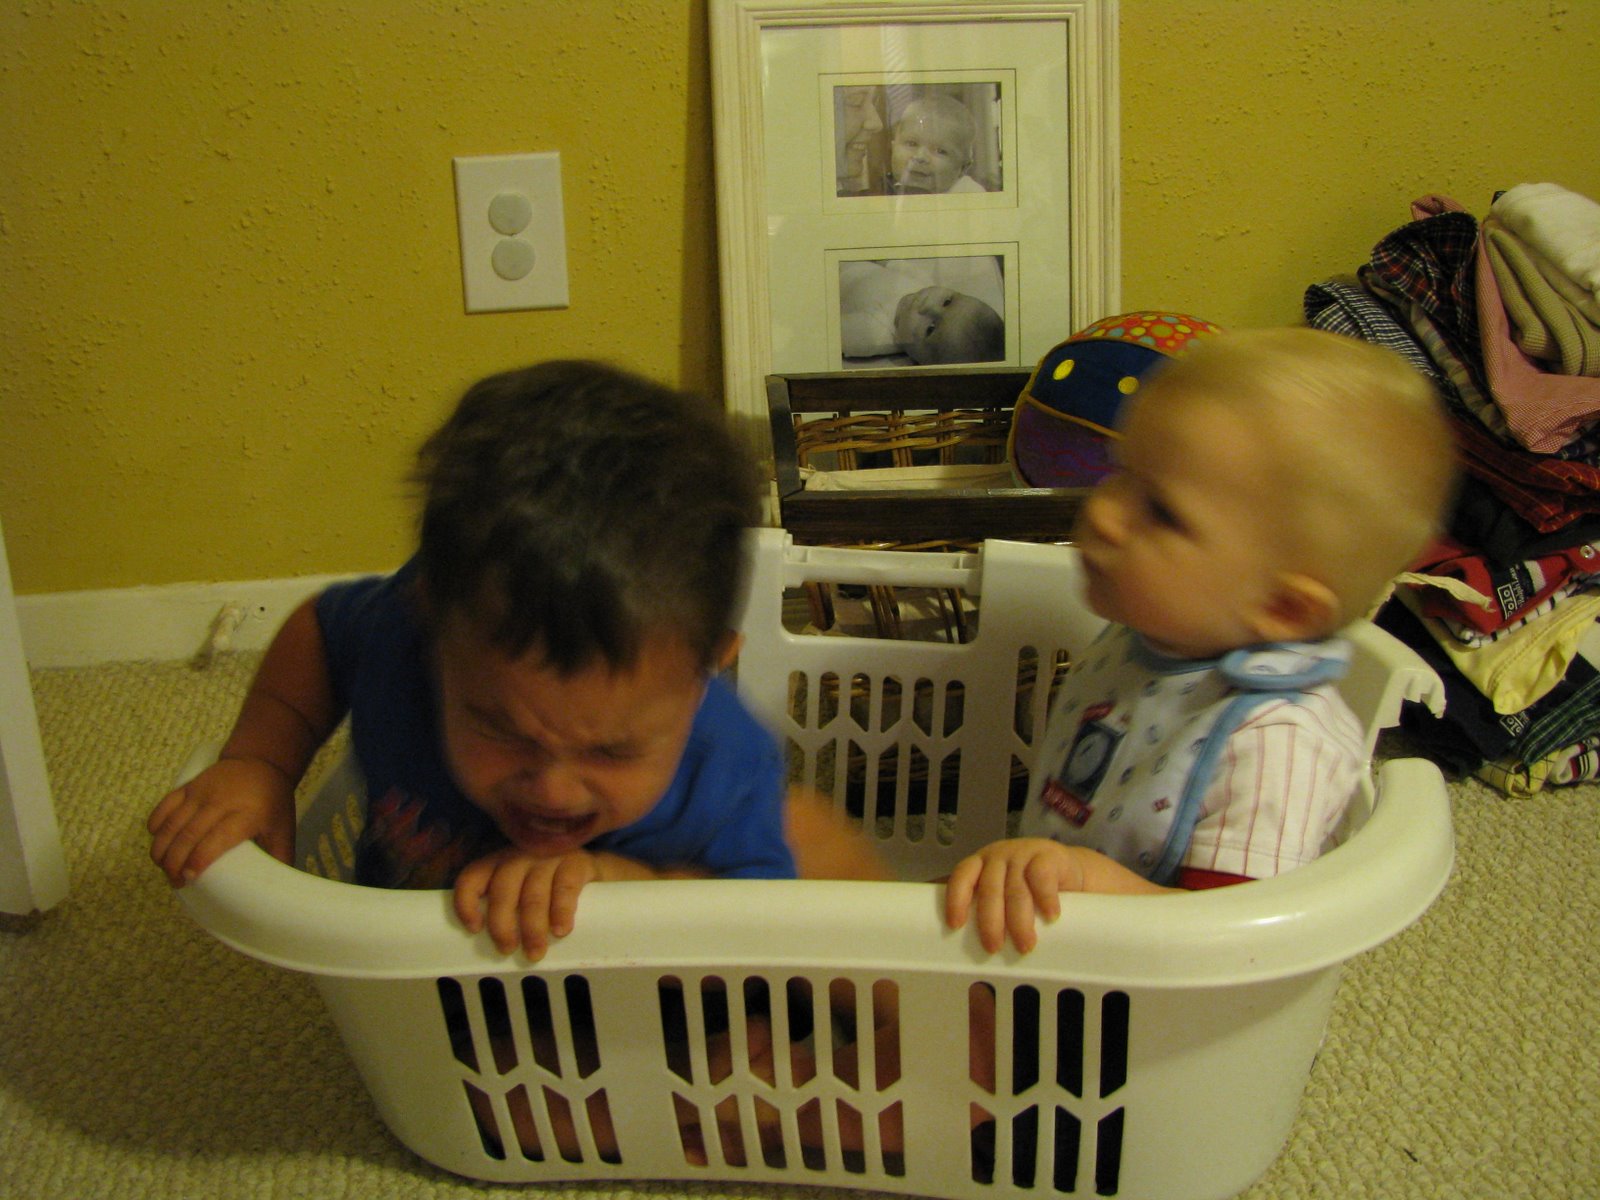 [Linc+and+Brice+in+the+basket.JPG]